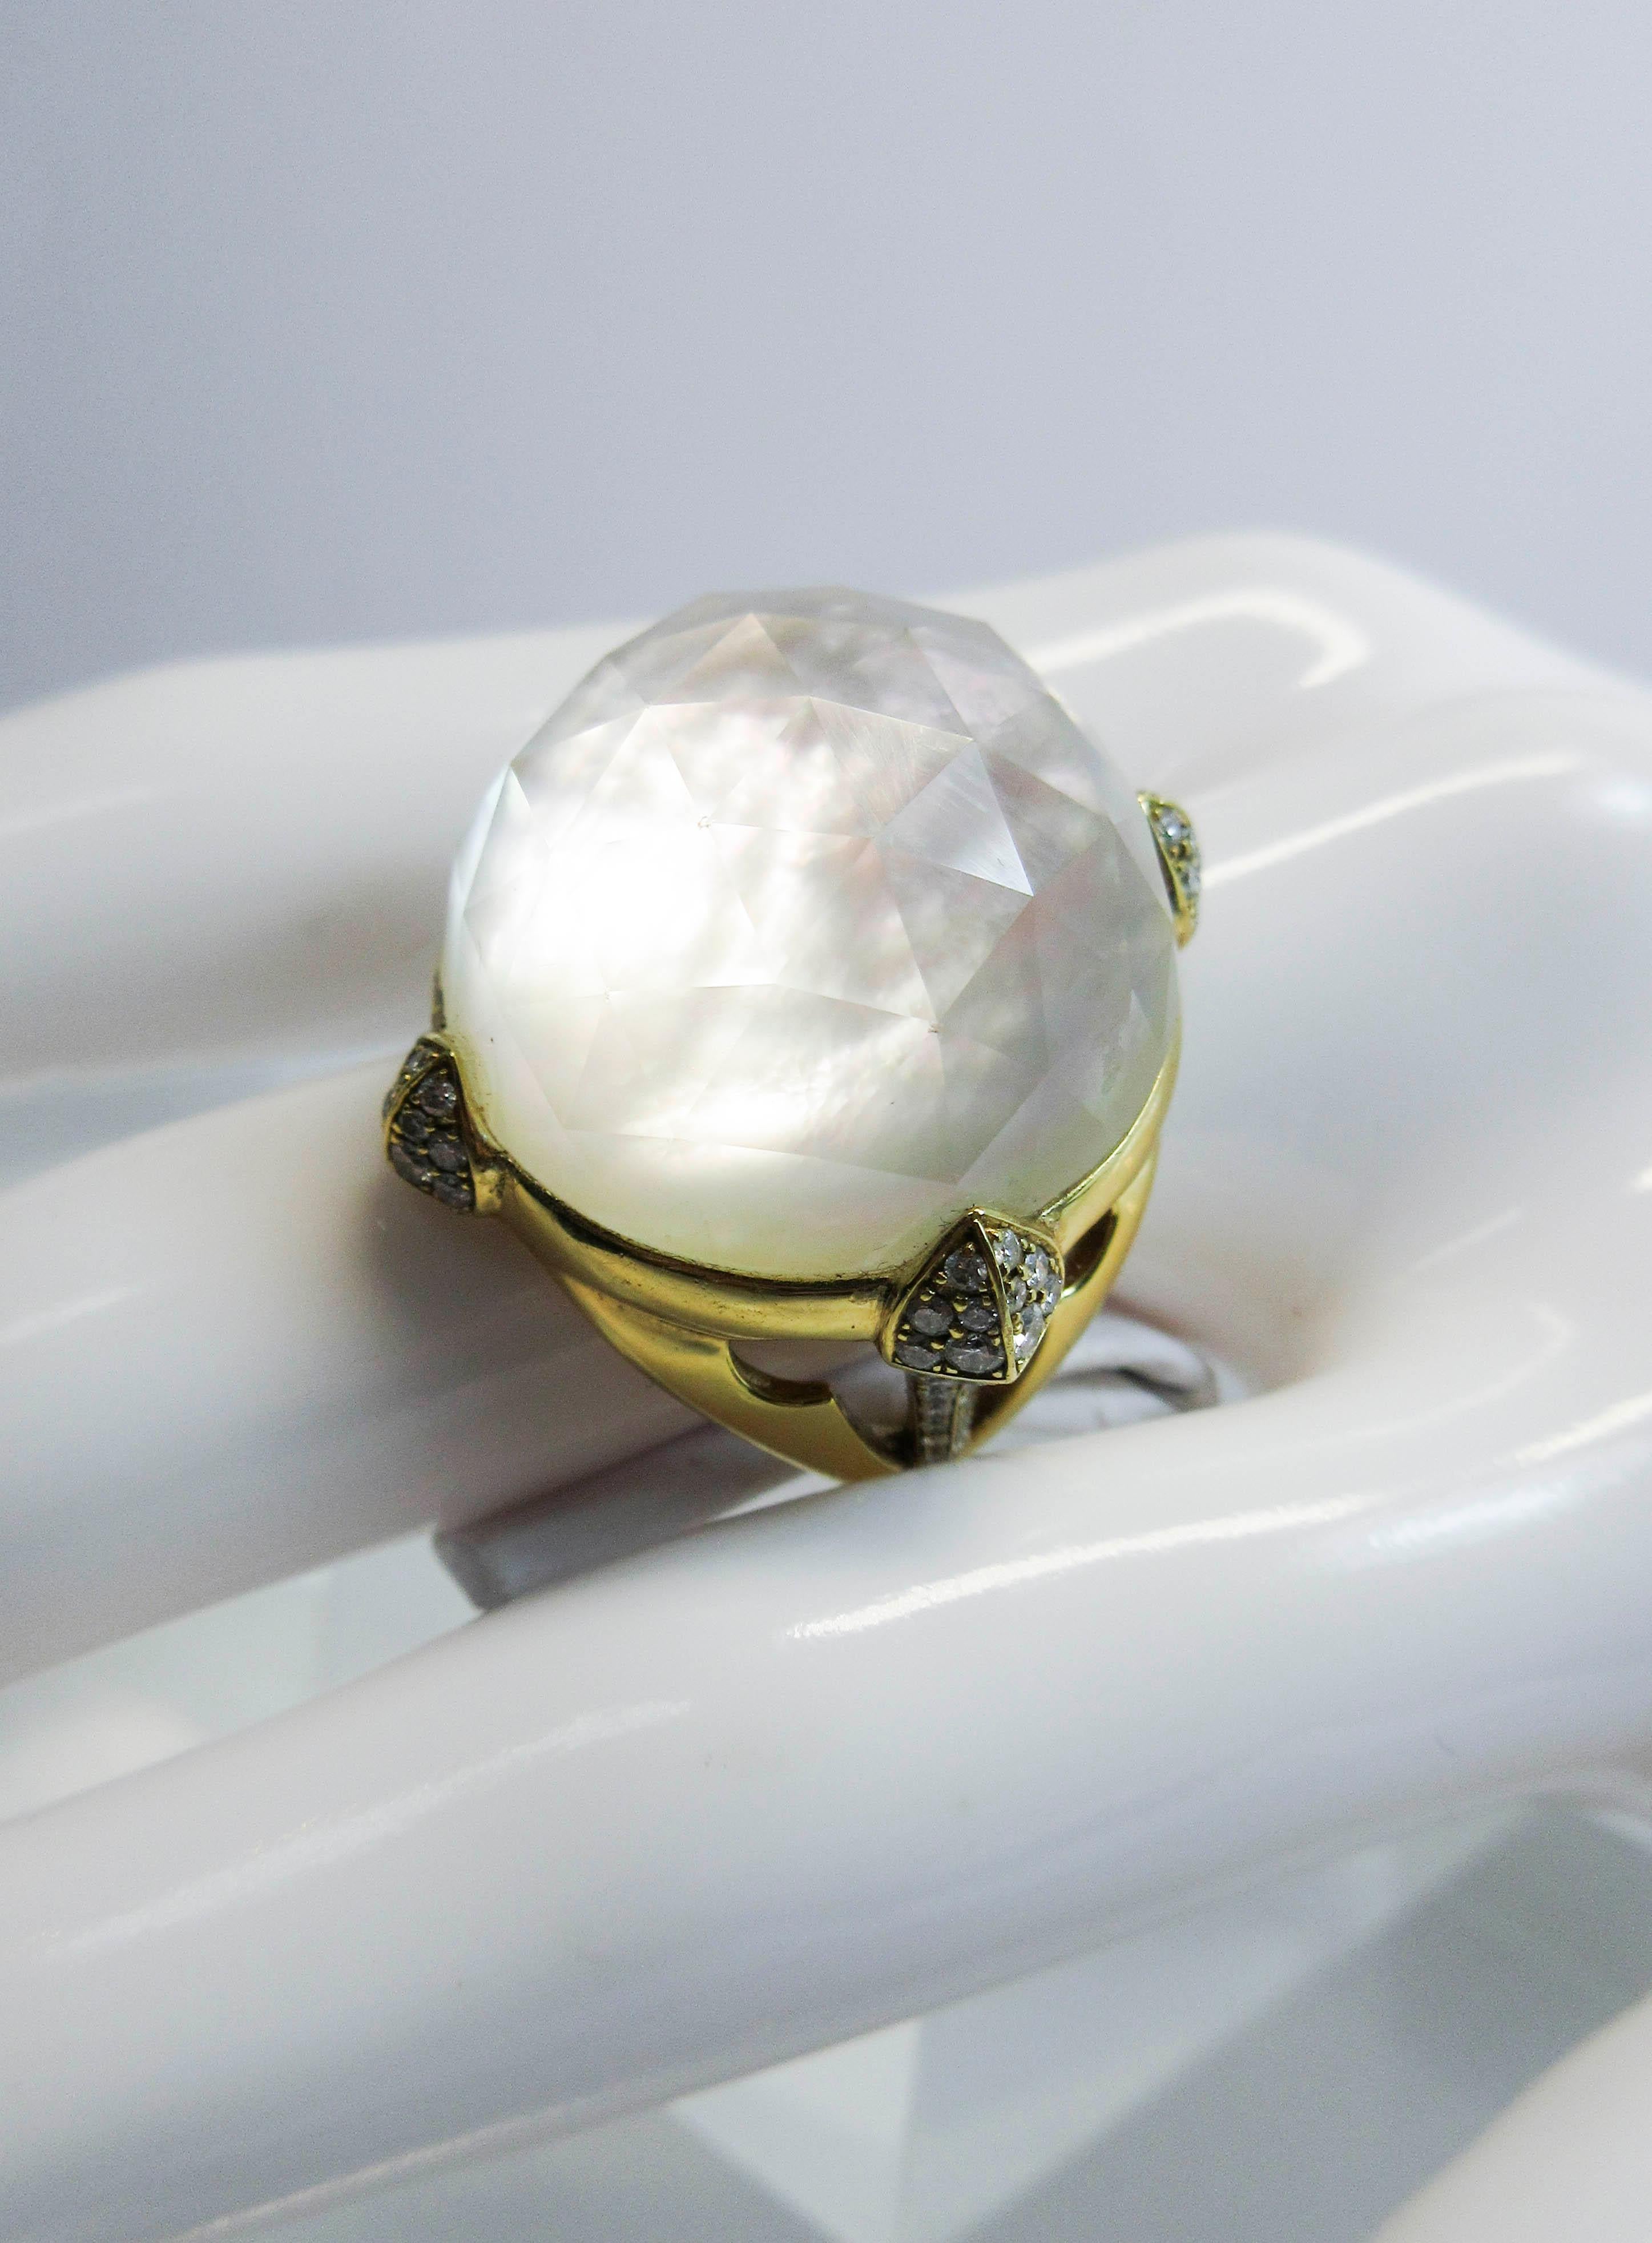 This is a stunning Stephen Webster design. The ring is composed of 18kt yellow gold with side diamond accents, and a center stone of faceted quartz with a mother of pearl base. An absolutely captivating cocktail ring. Size 7. Measures approximately